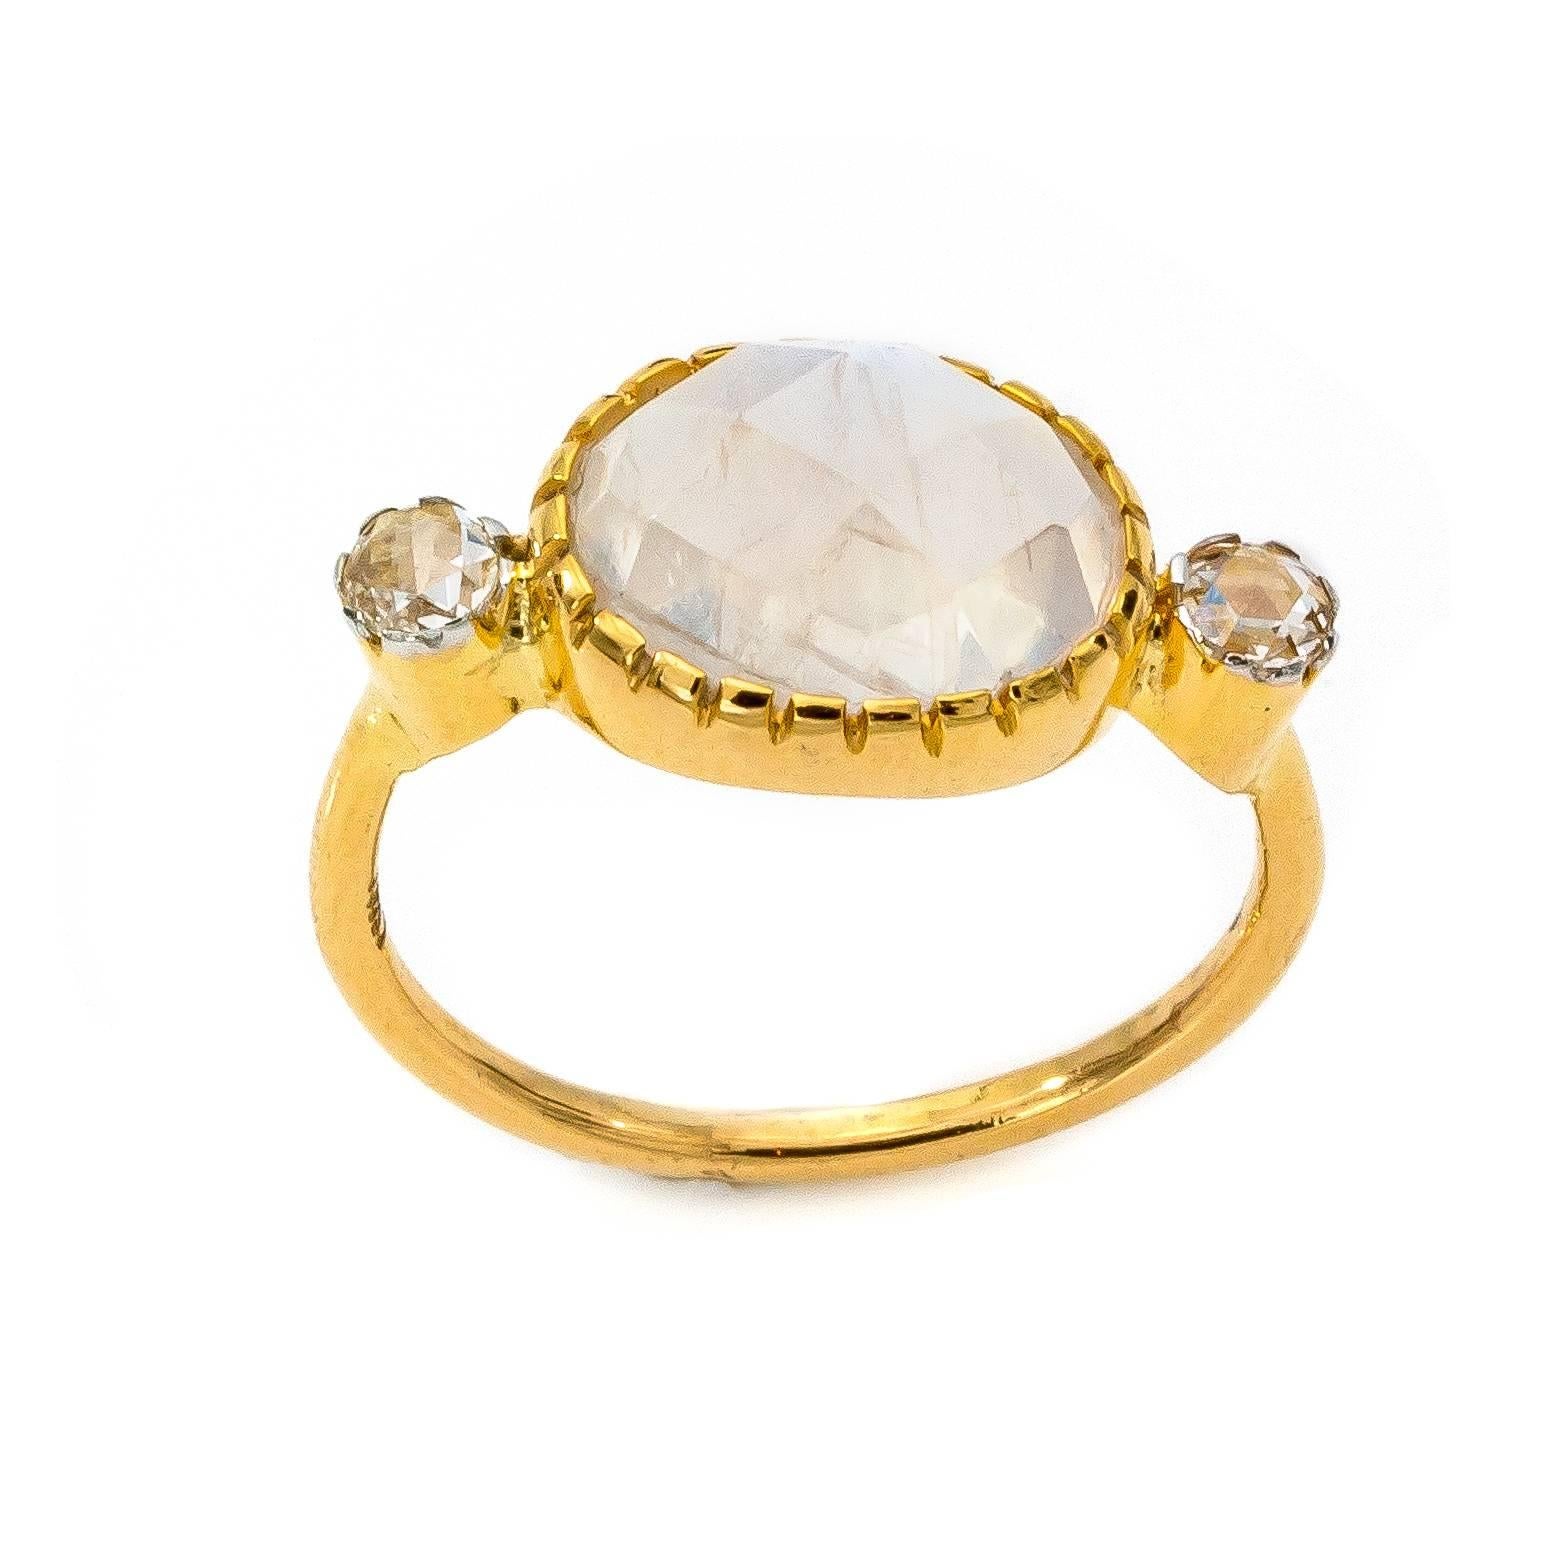 Women's Diamond Rose Cut and Faceted Oval Moonstone Ring in 18 Karat Gold